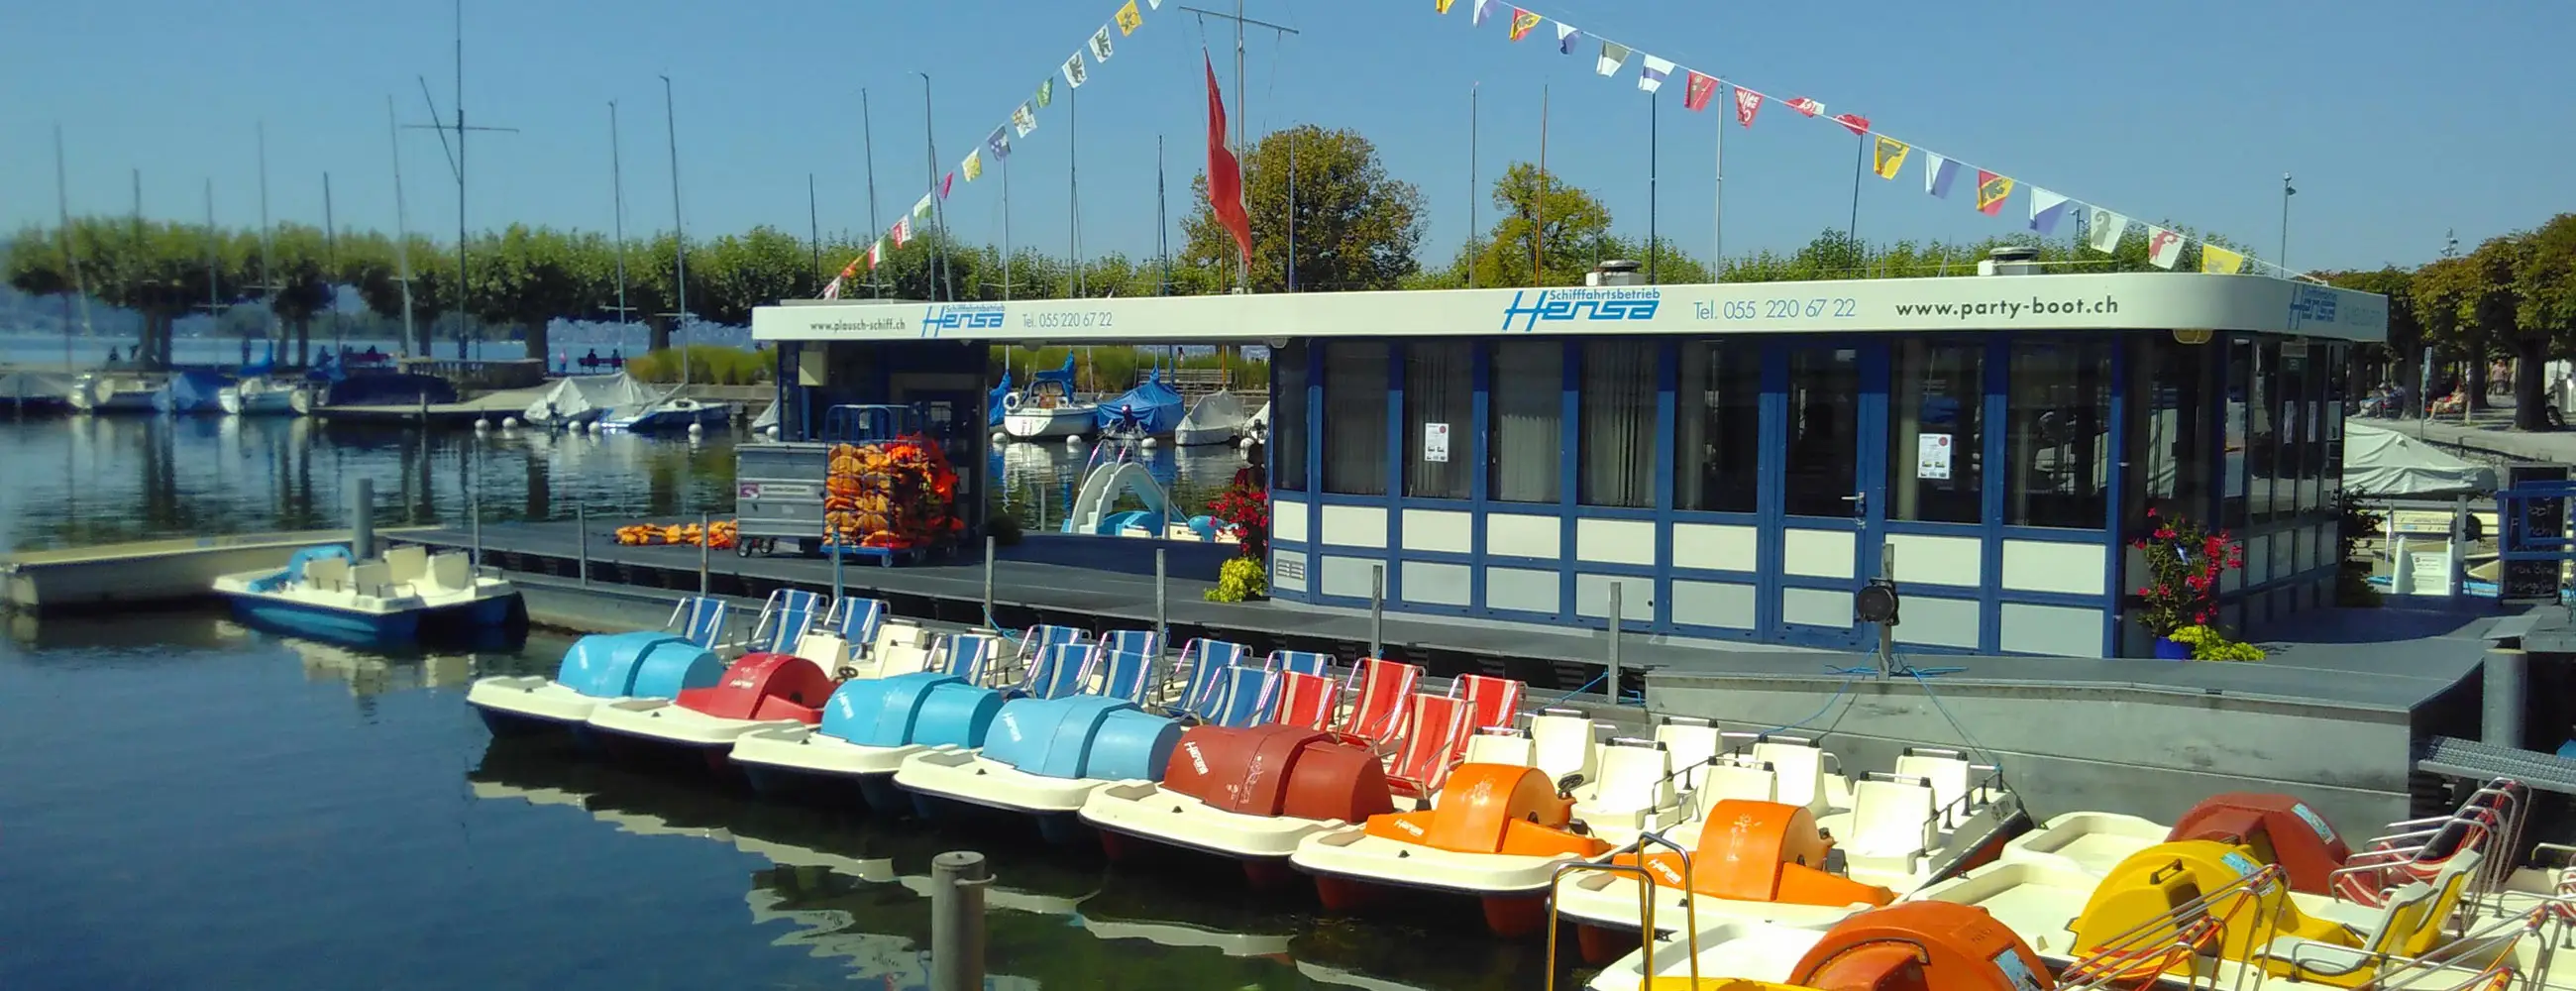 pedalo-hensa-werft-rapperswil-04